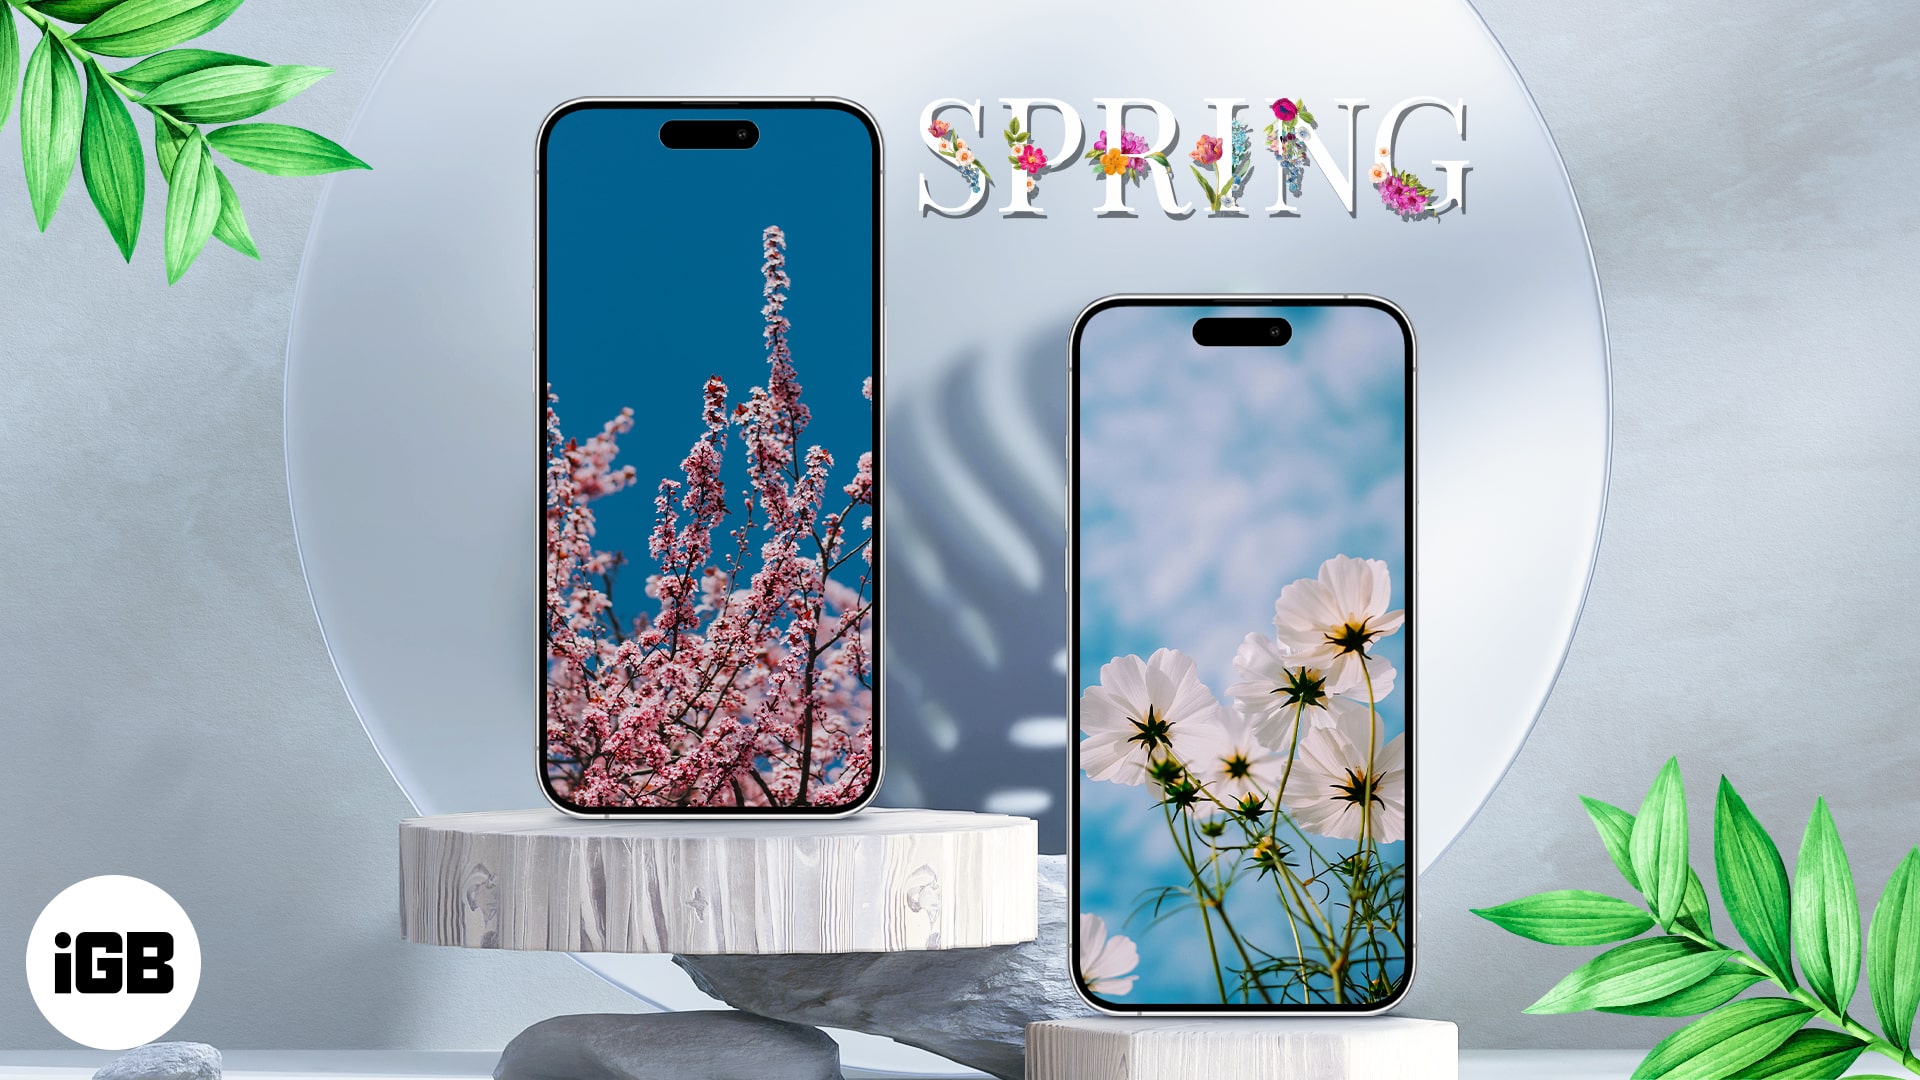 Stunning spring wallpapers for iPhone in 2023 (Free download) - iGeeksBlog